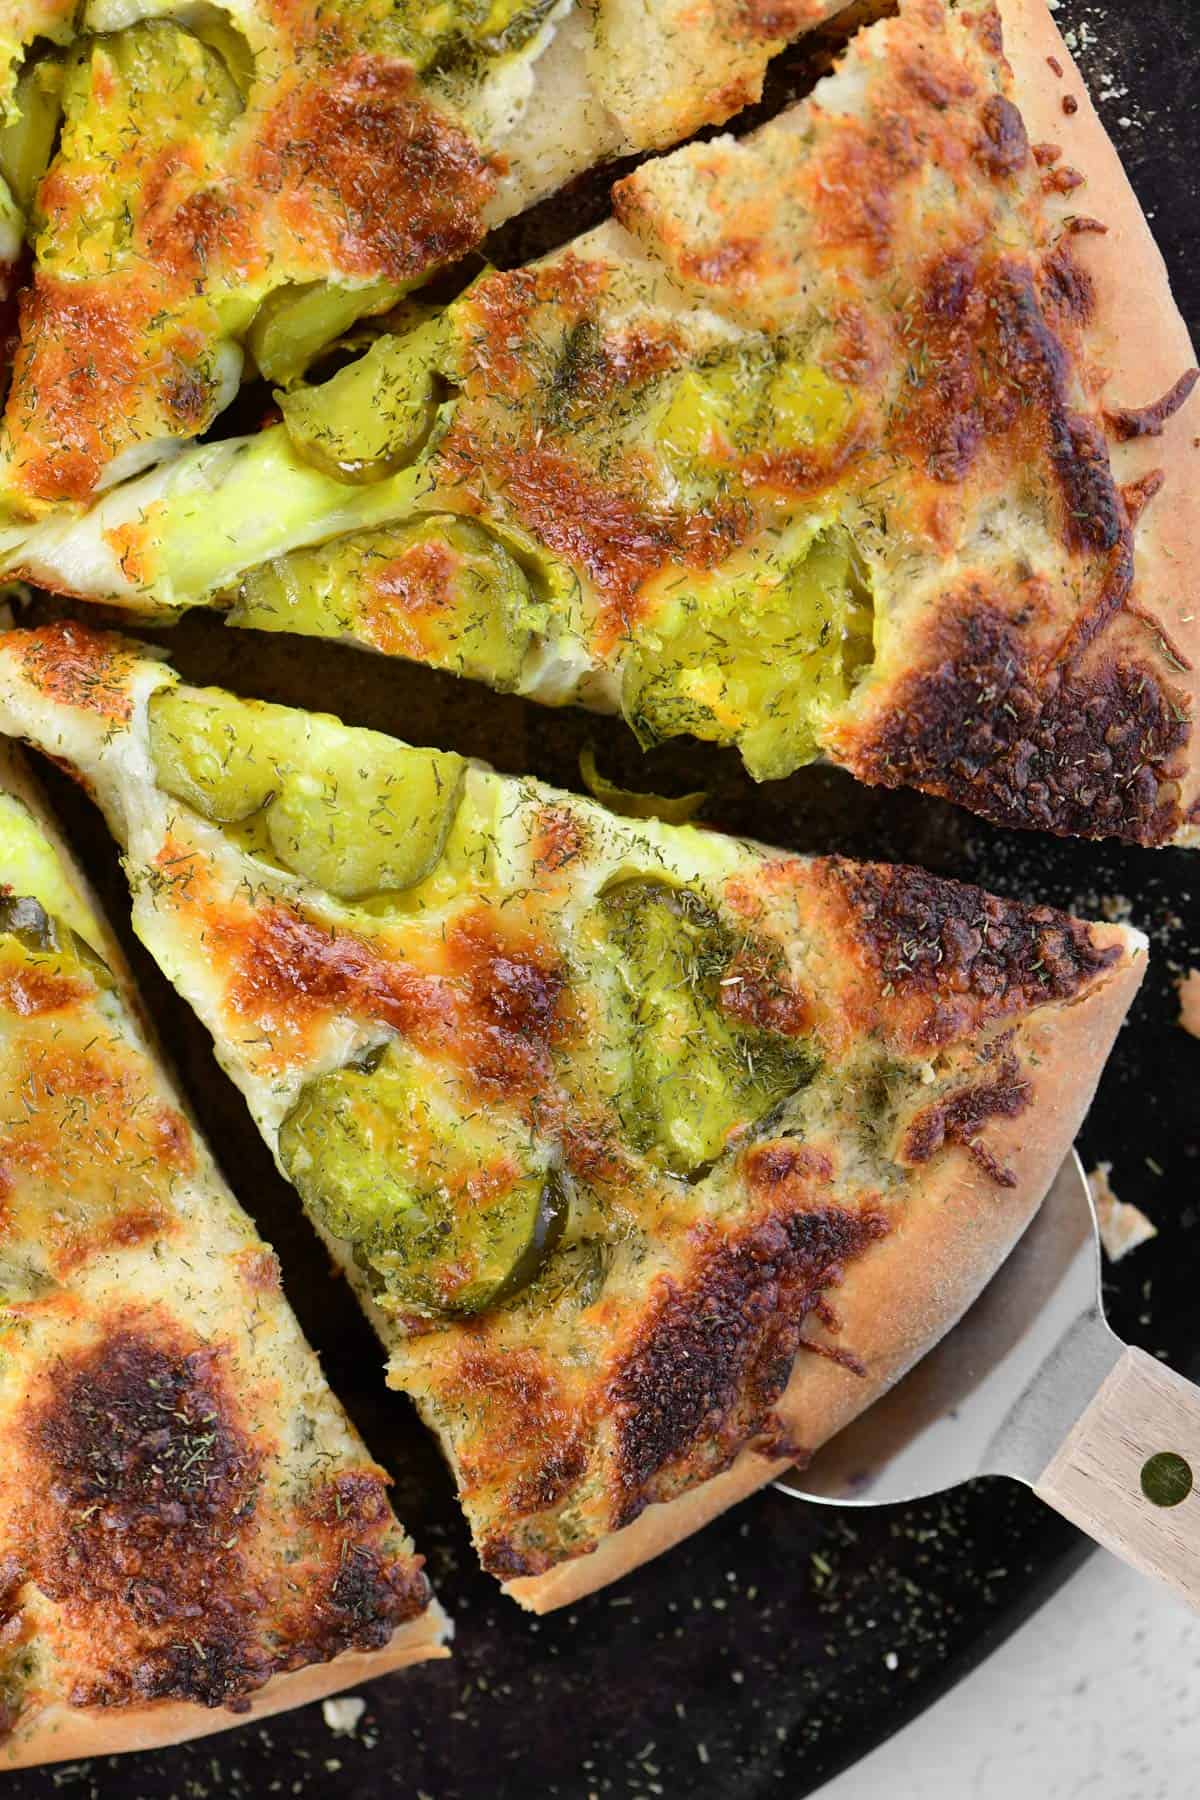 A pizza server removing a slice of dill pickle pizza.